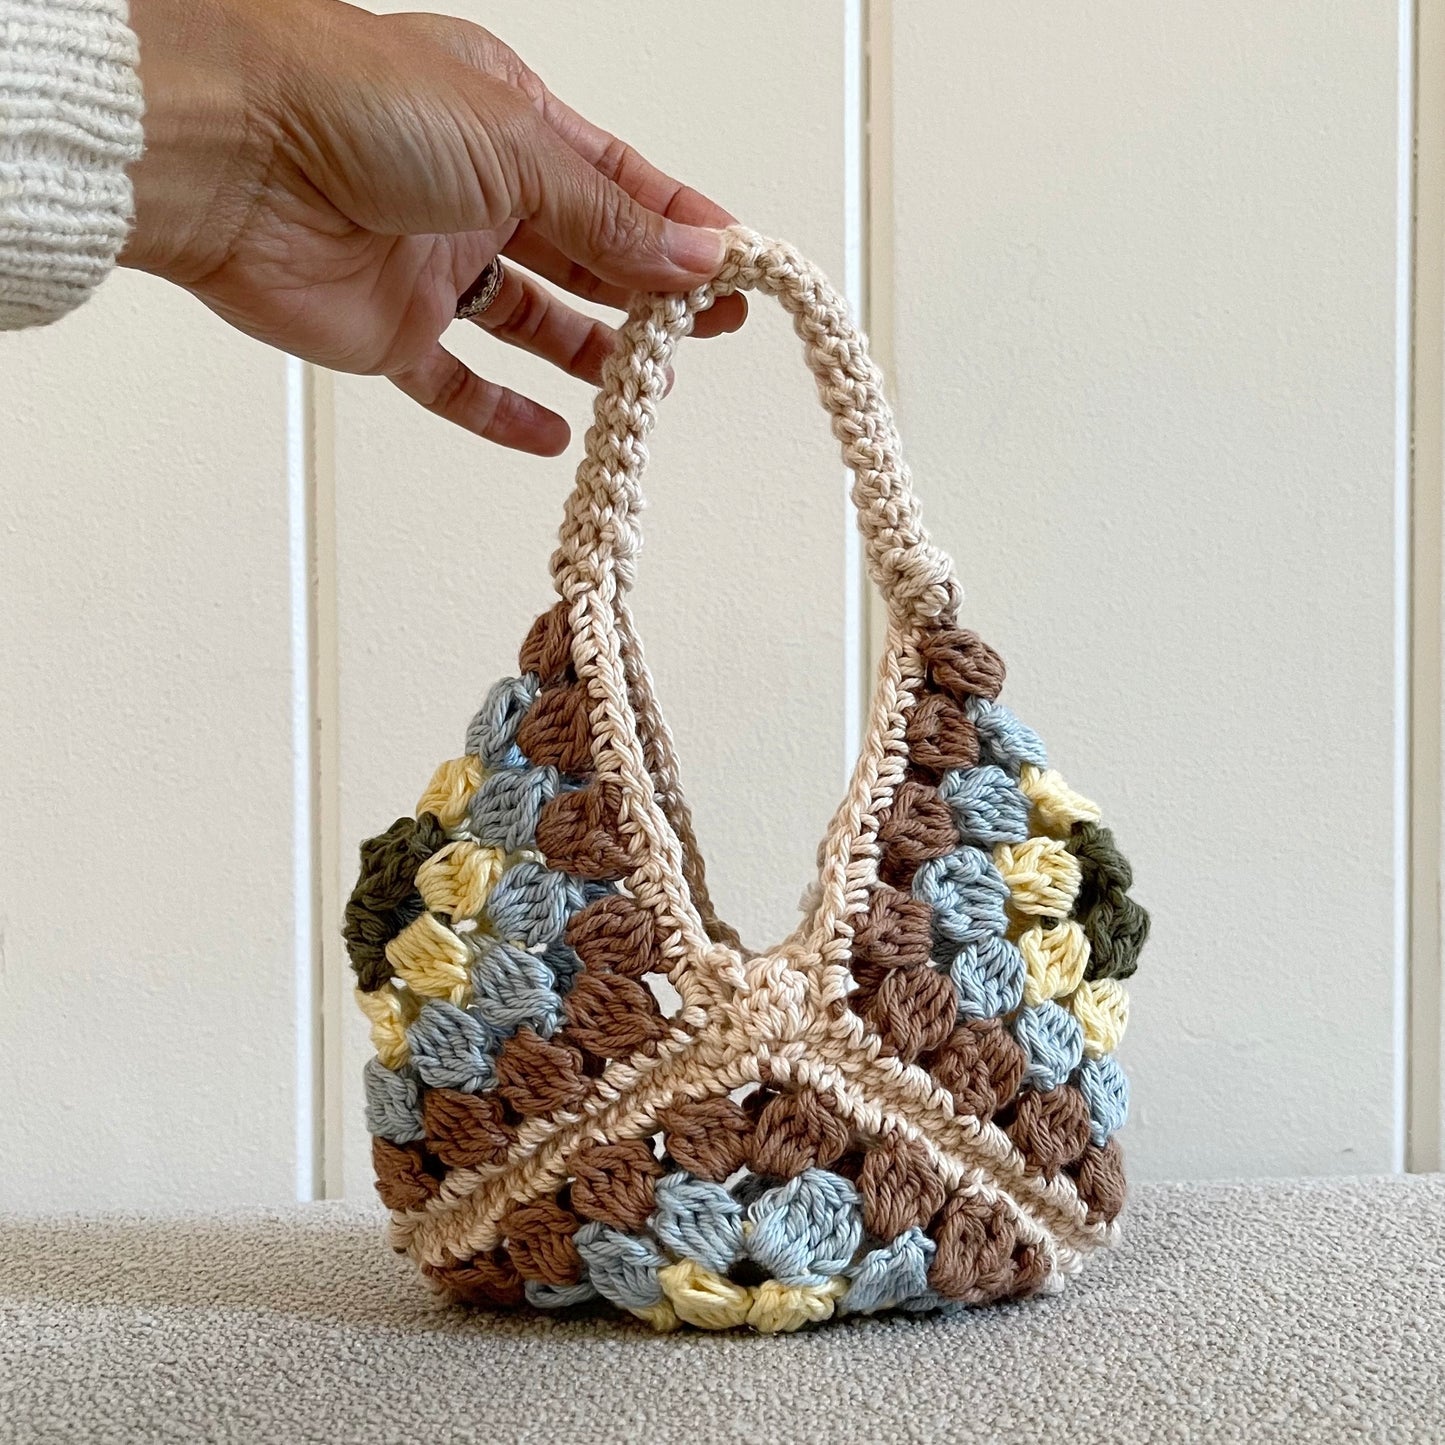 A mini crochet granny square handbag  Measures 7 by 7 inches + the hand strap. It is great for a cell phone, keys and some touch up makeup. Perfect for a night out.  Made of 100% cotton in colors cream, light brown, baby blue, light yellow and military green. 